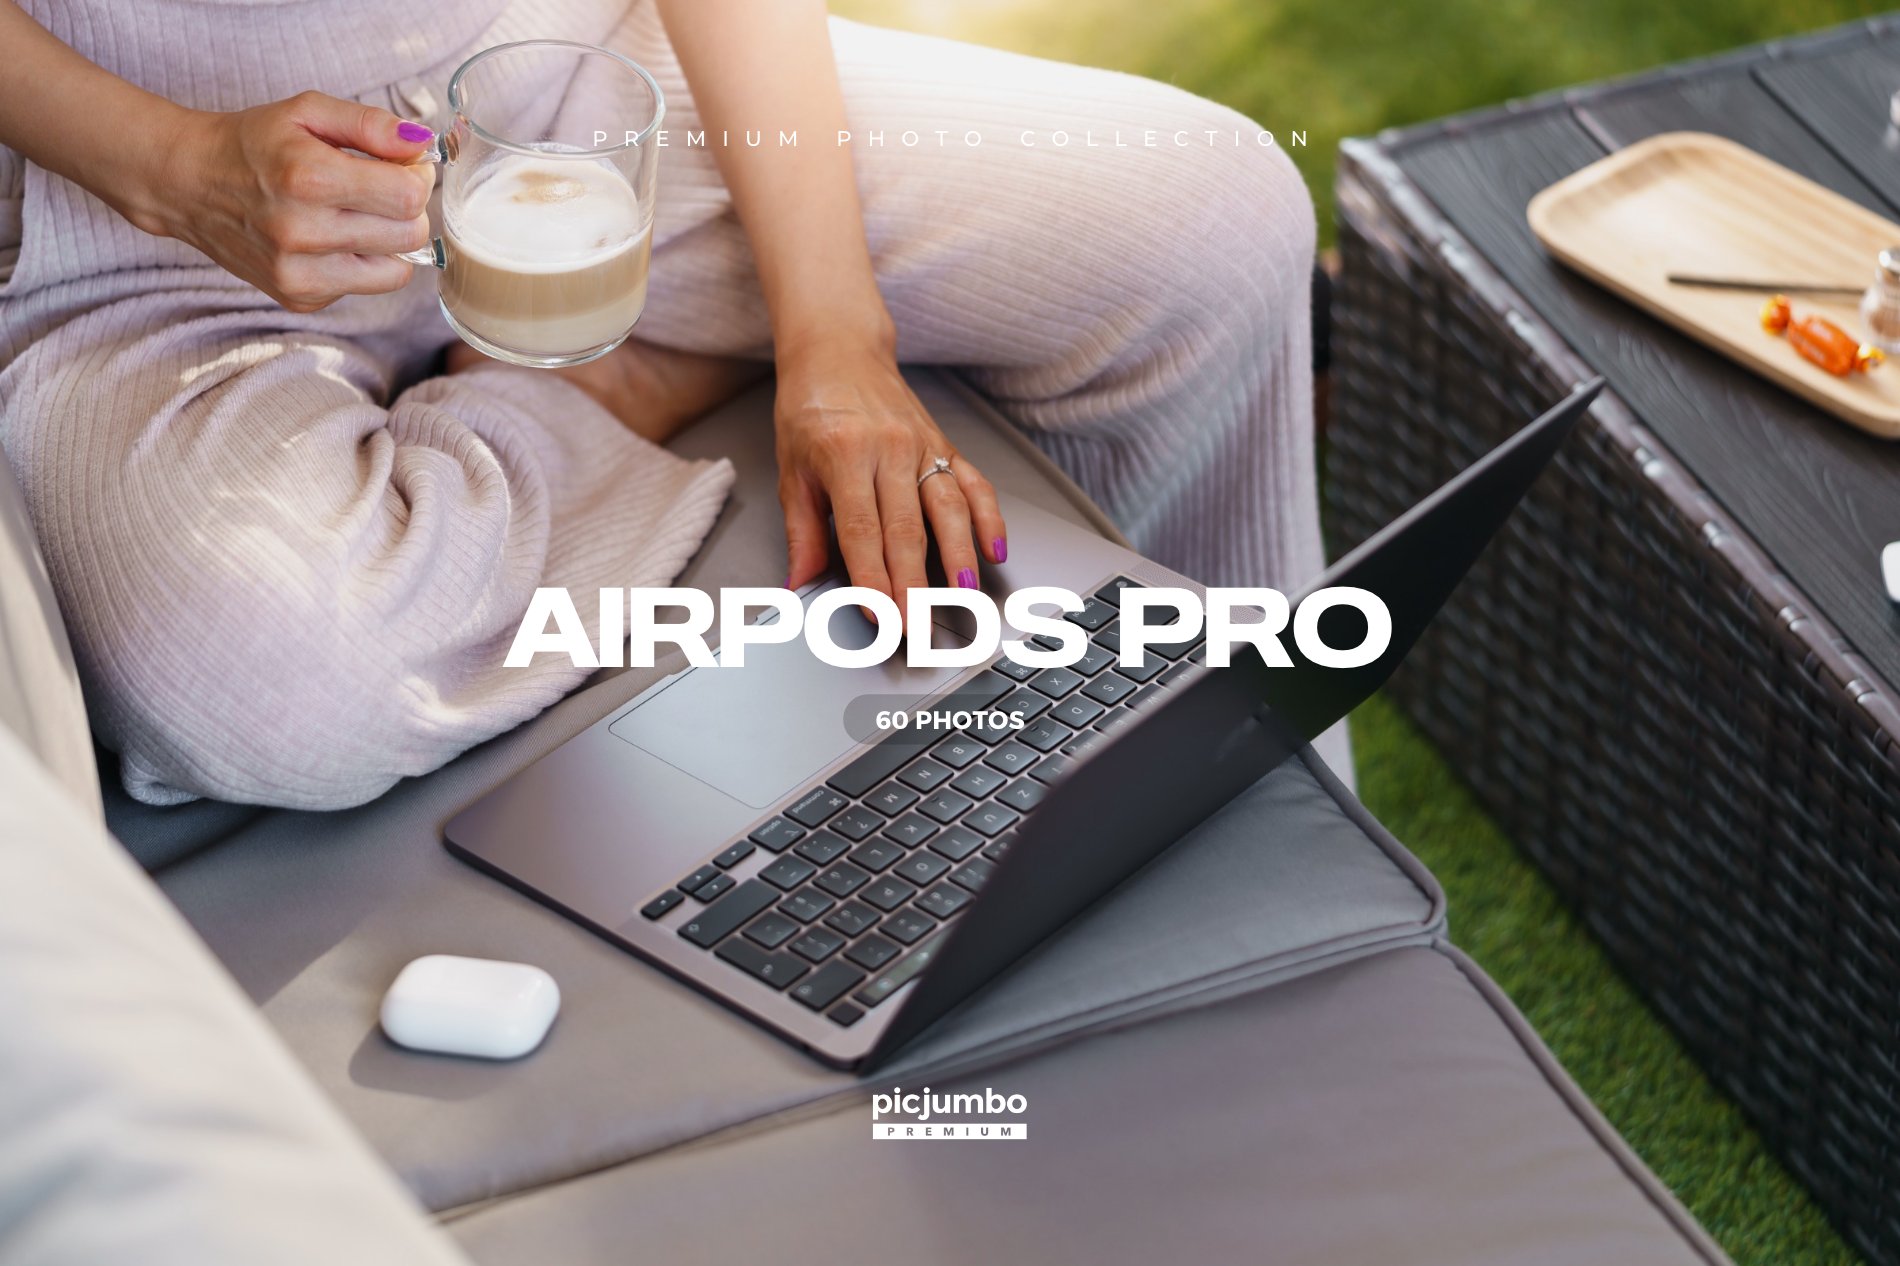 Download hi-res stock photos from our AirPods Pro PREMIUM Collection!